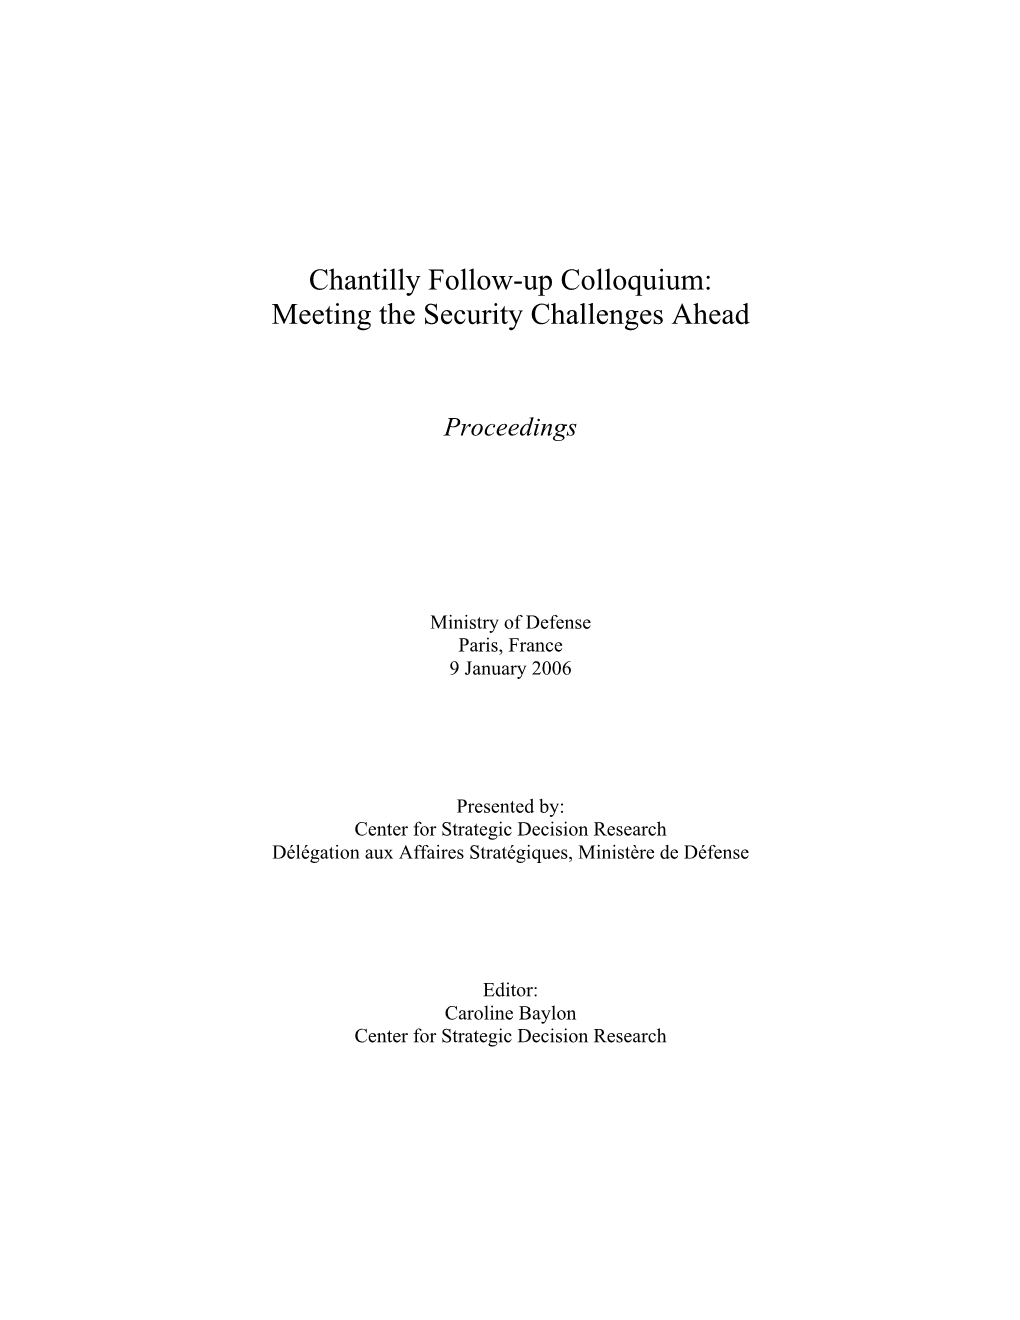 Proceedings of the Chantilly Follow-Up Colloquium: Meeting The